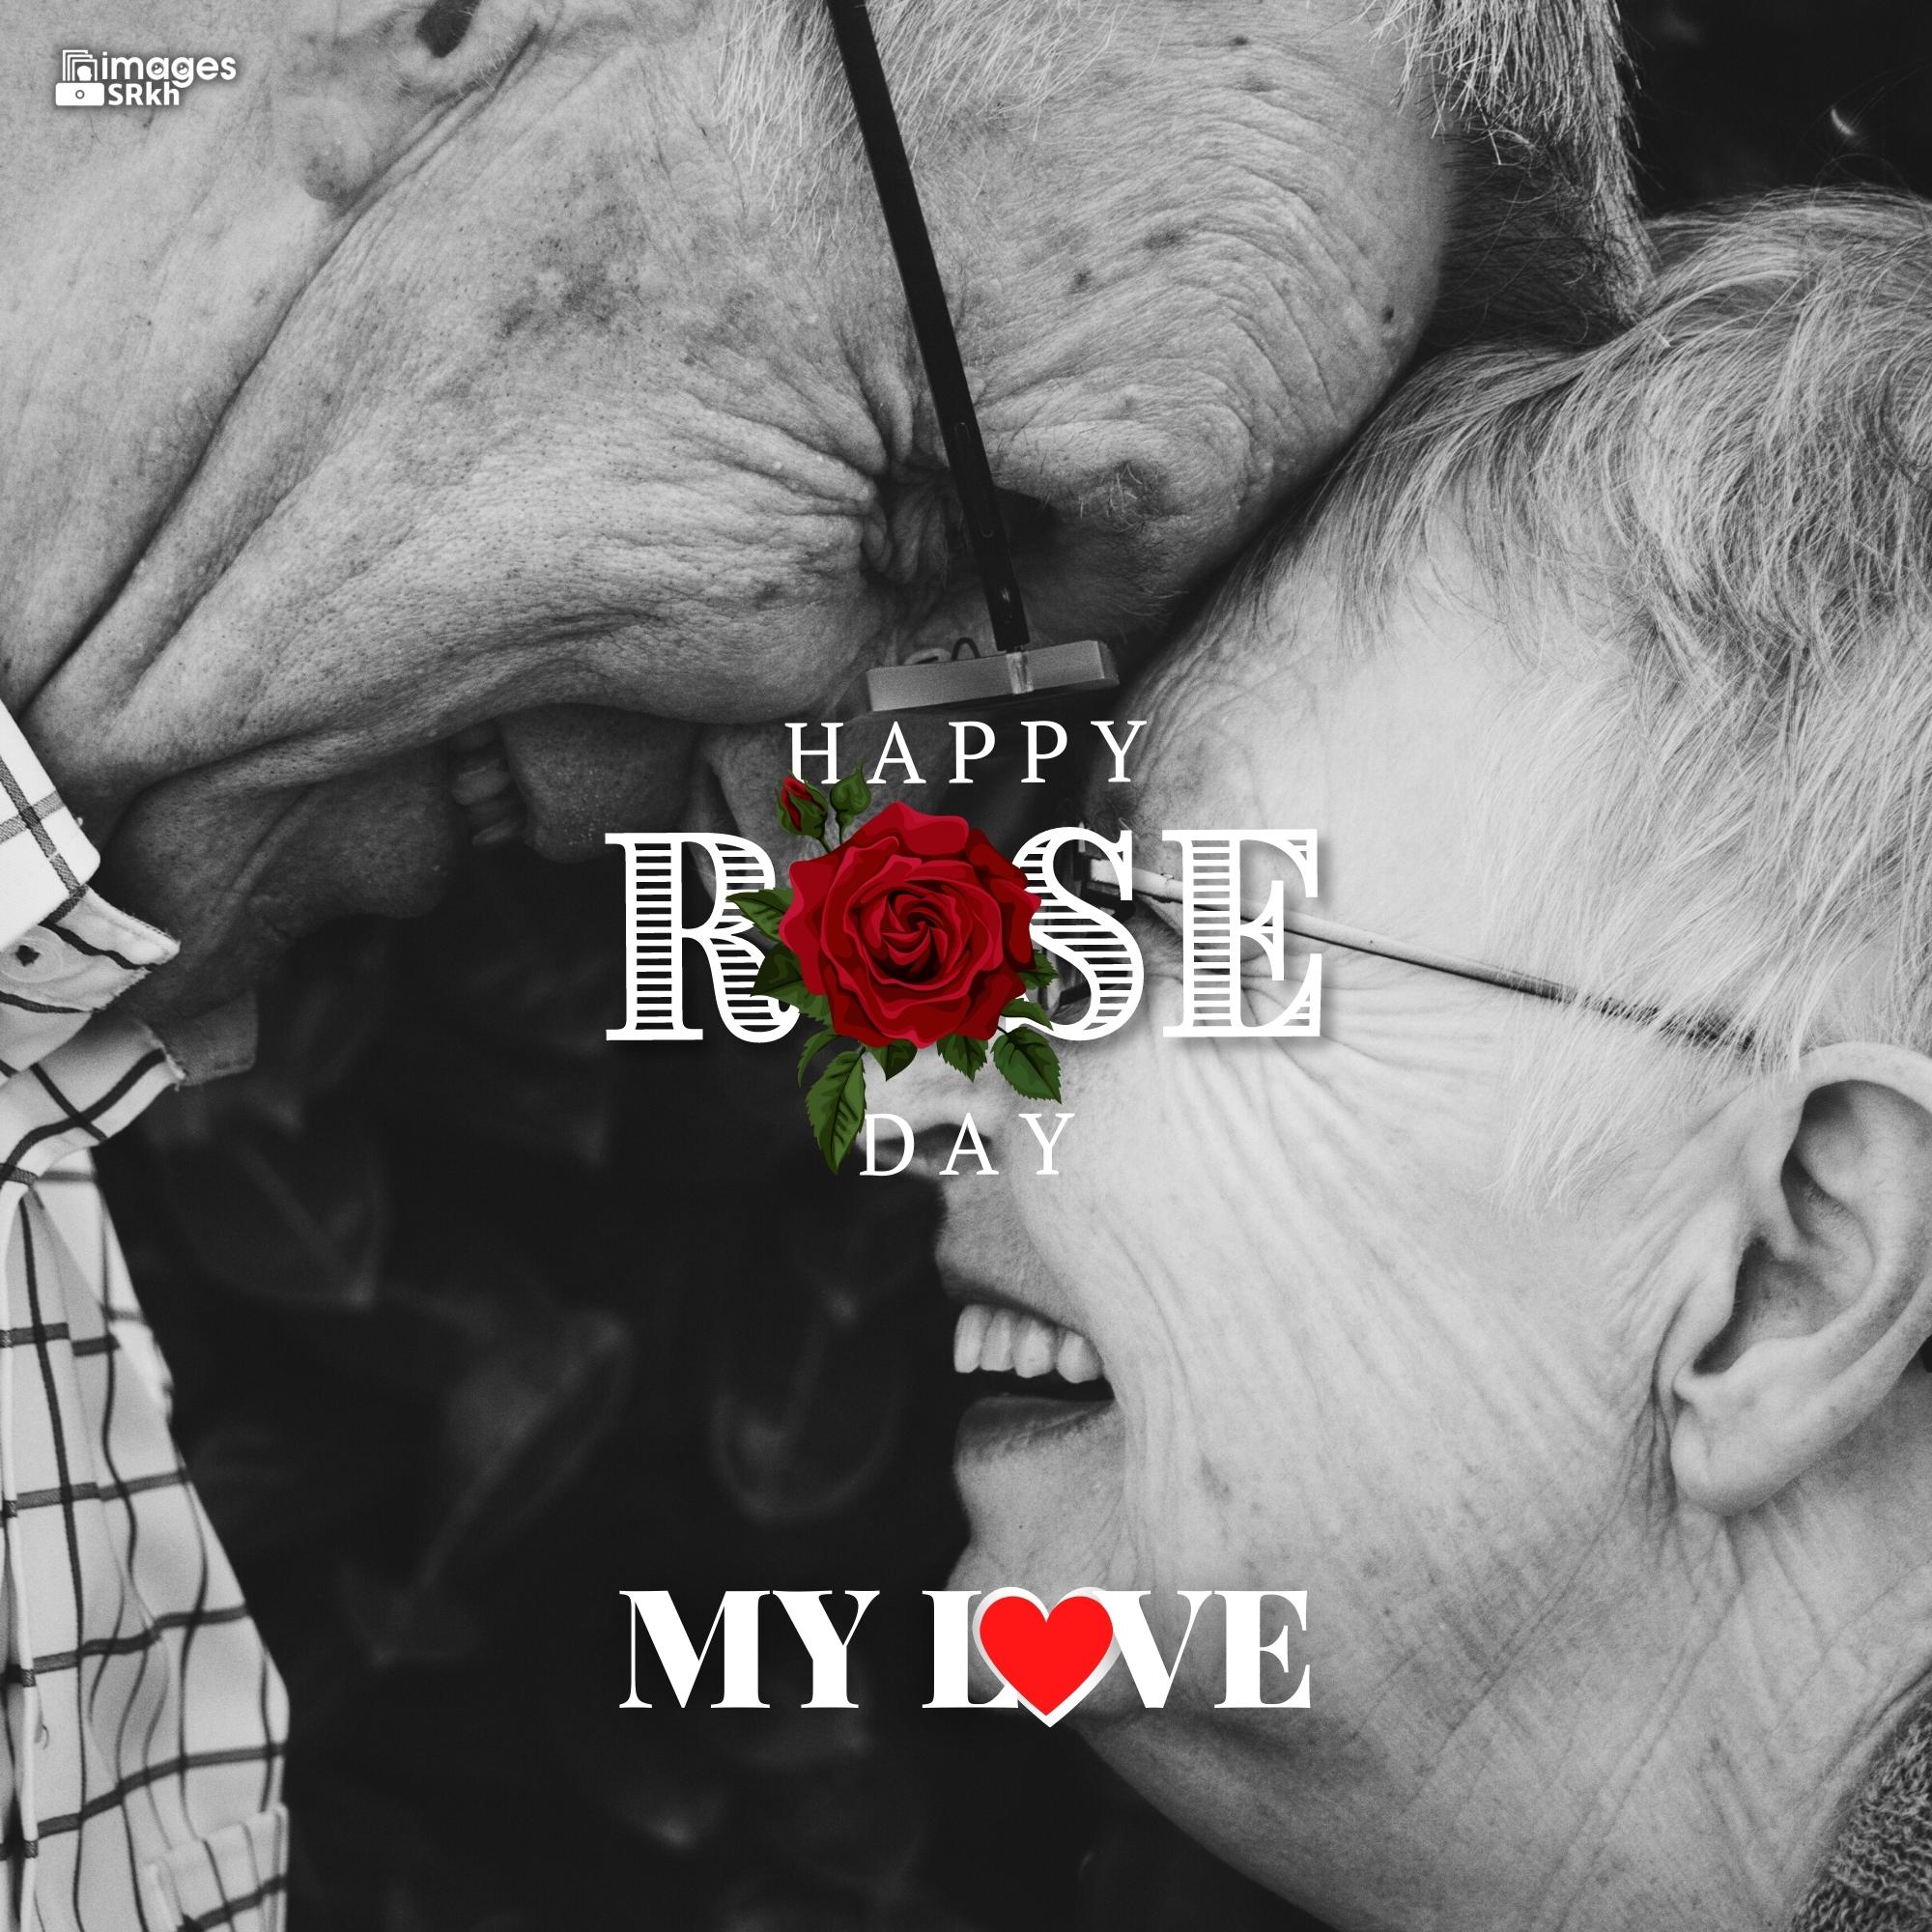 Happy Rose Day My Love (12) | HD IMAGES